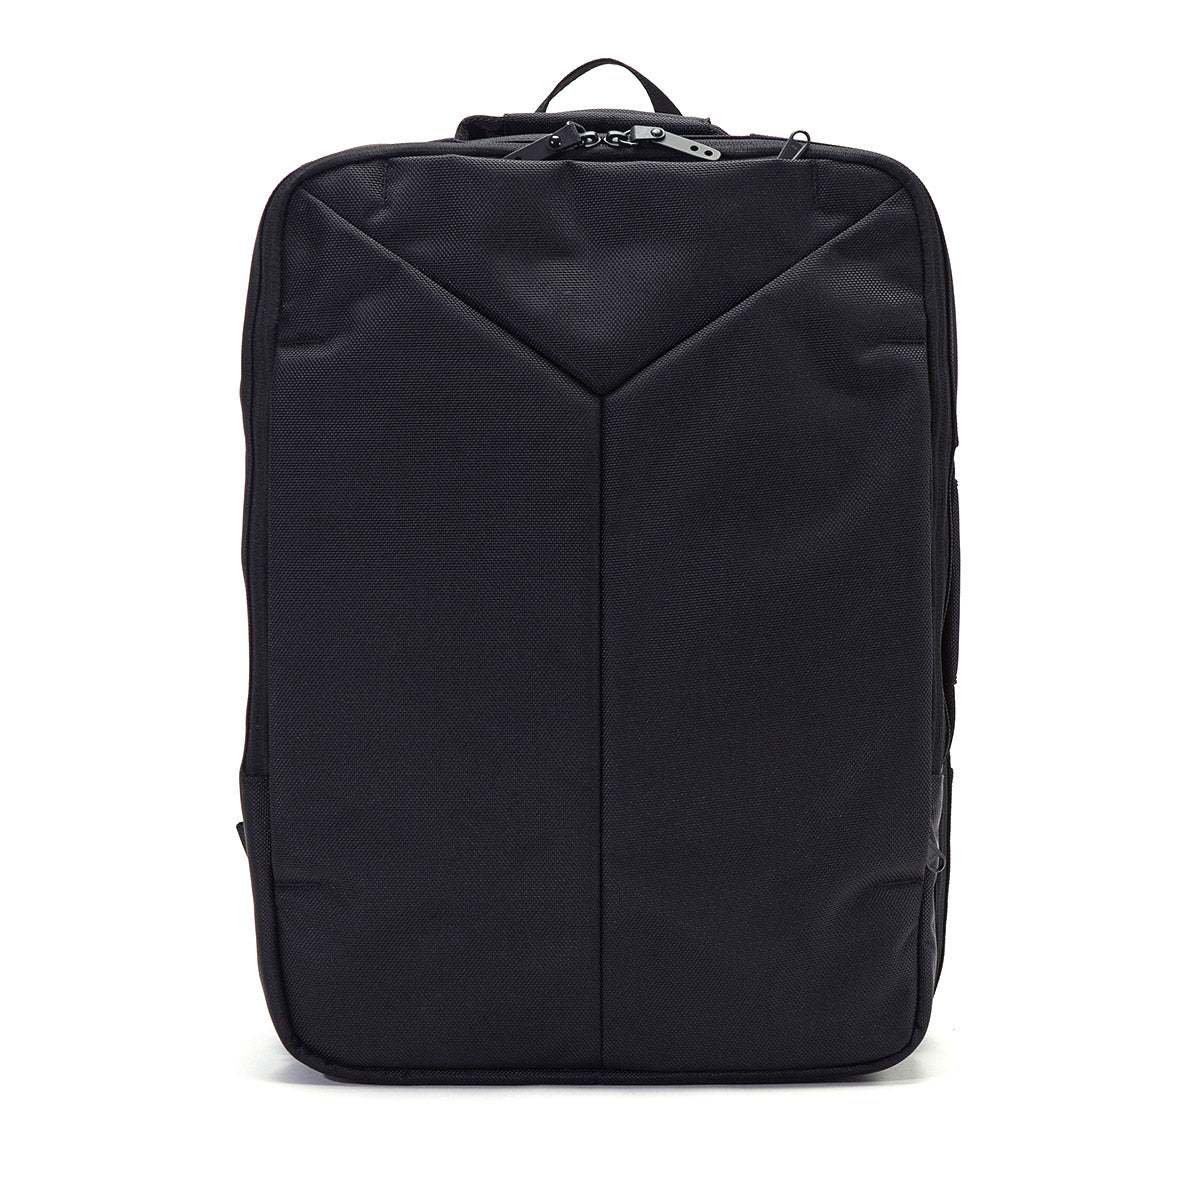 SML Diego Extended 3 Layer Backpack Rucksack DIEGO EXTENDED 3 ...